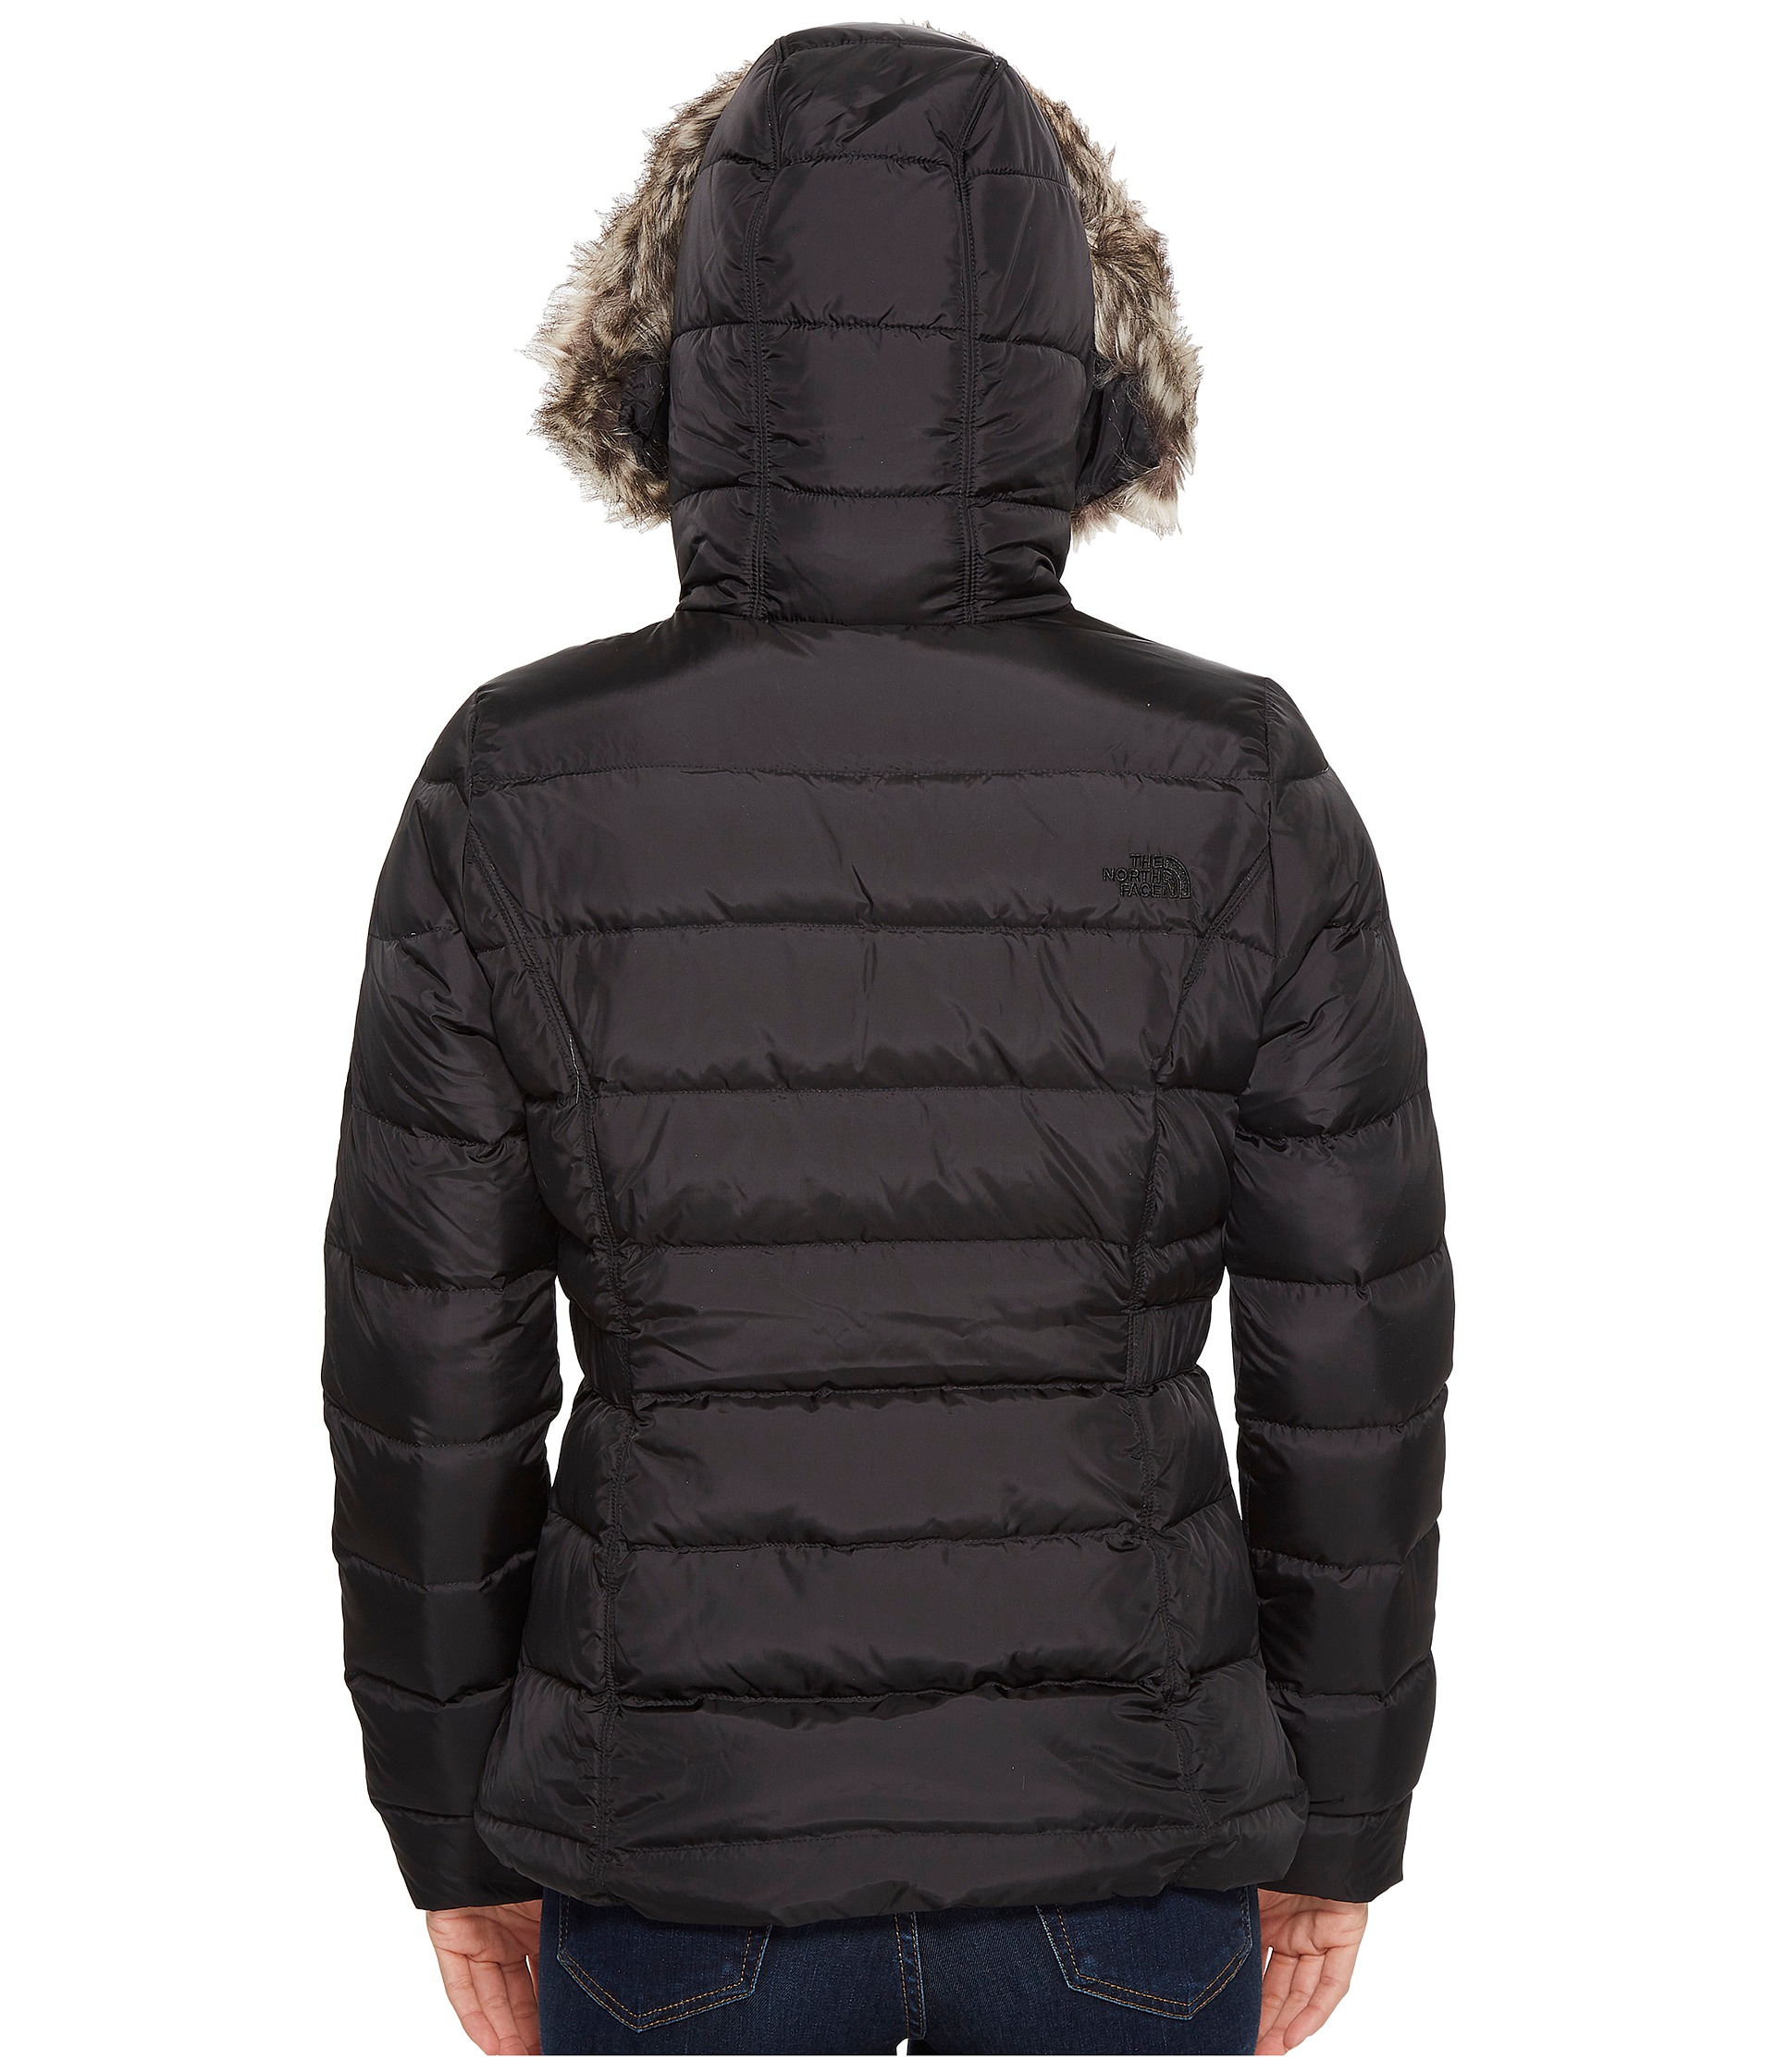 The North Face Gotham Down Jacket - Zappos.com Free Shipping BOTH Ways